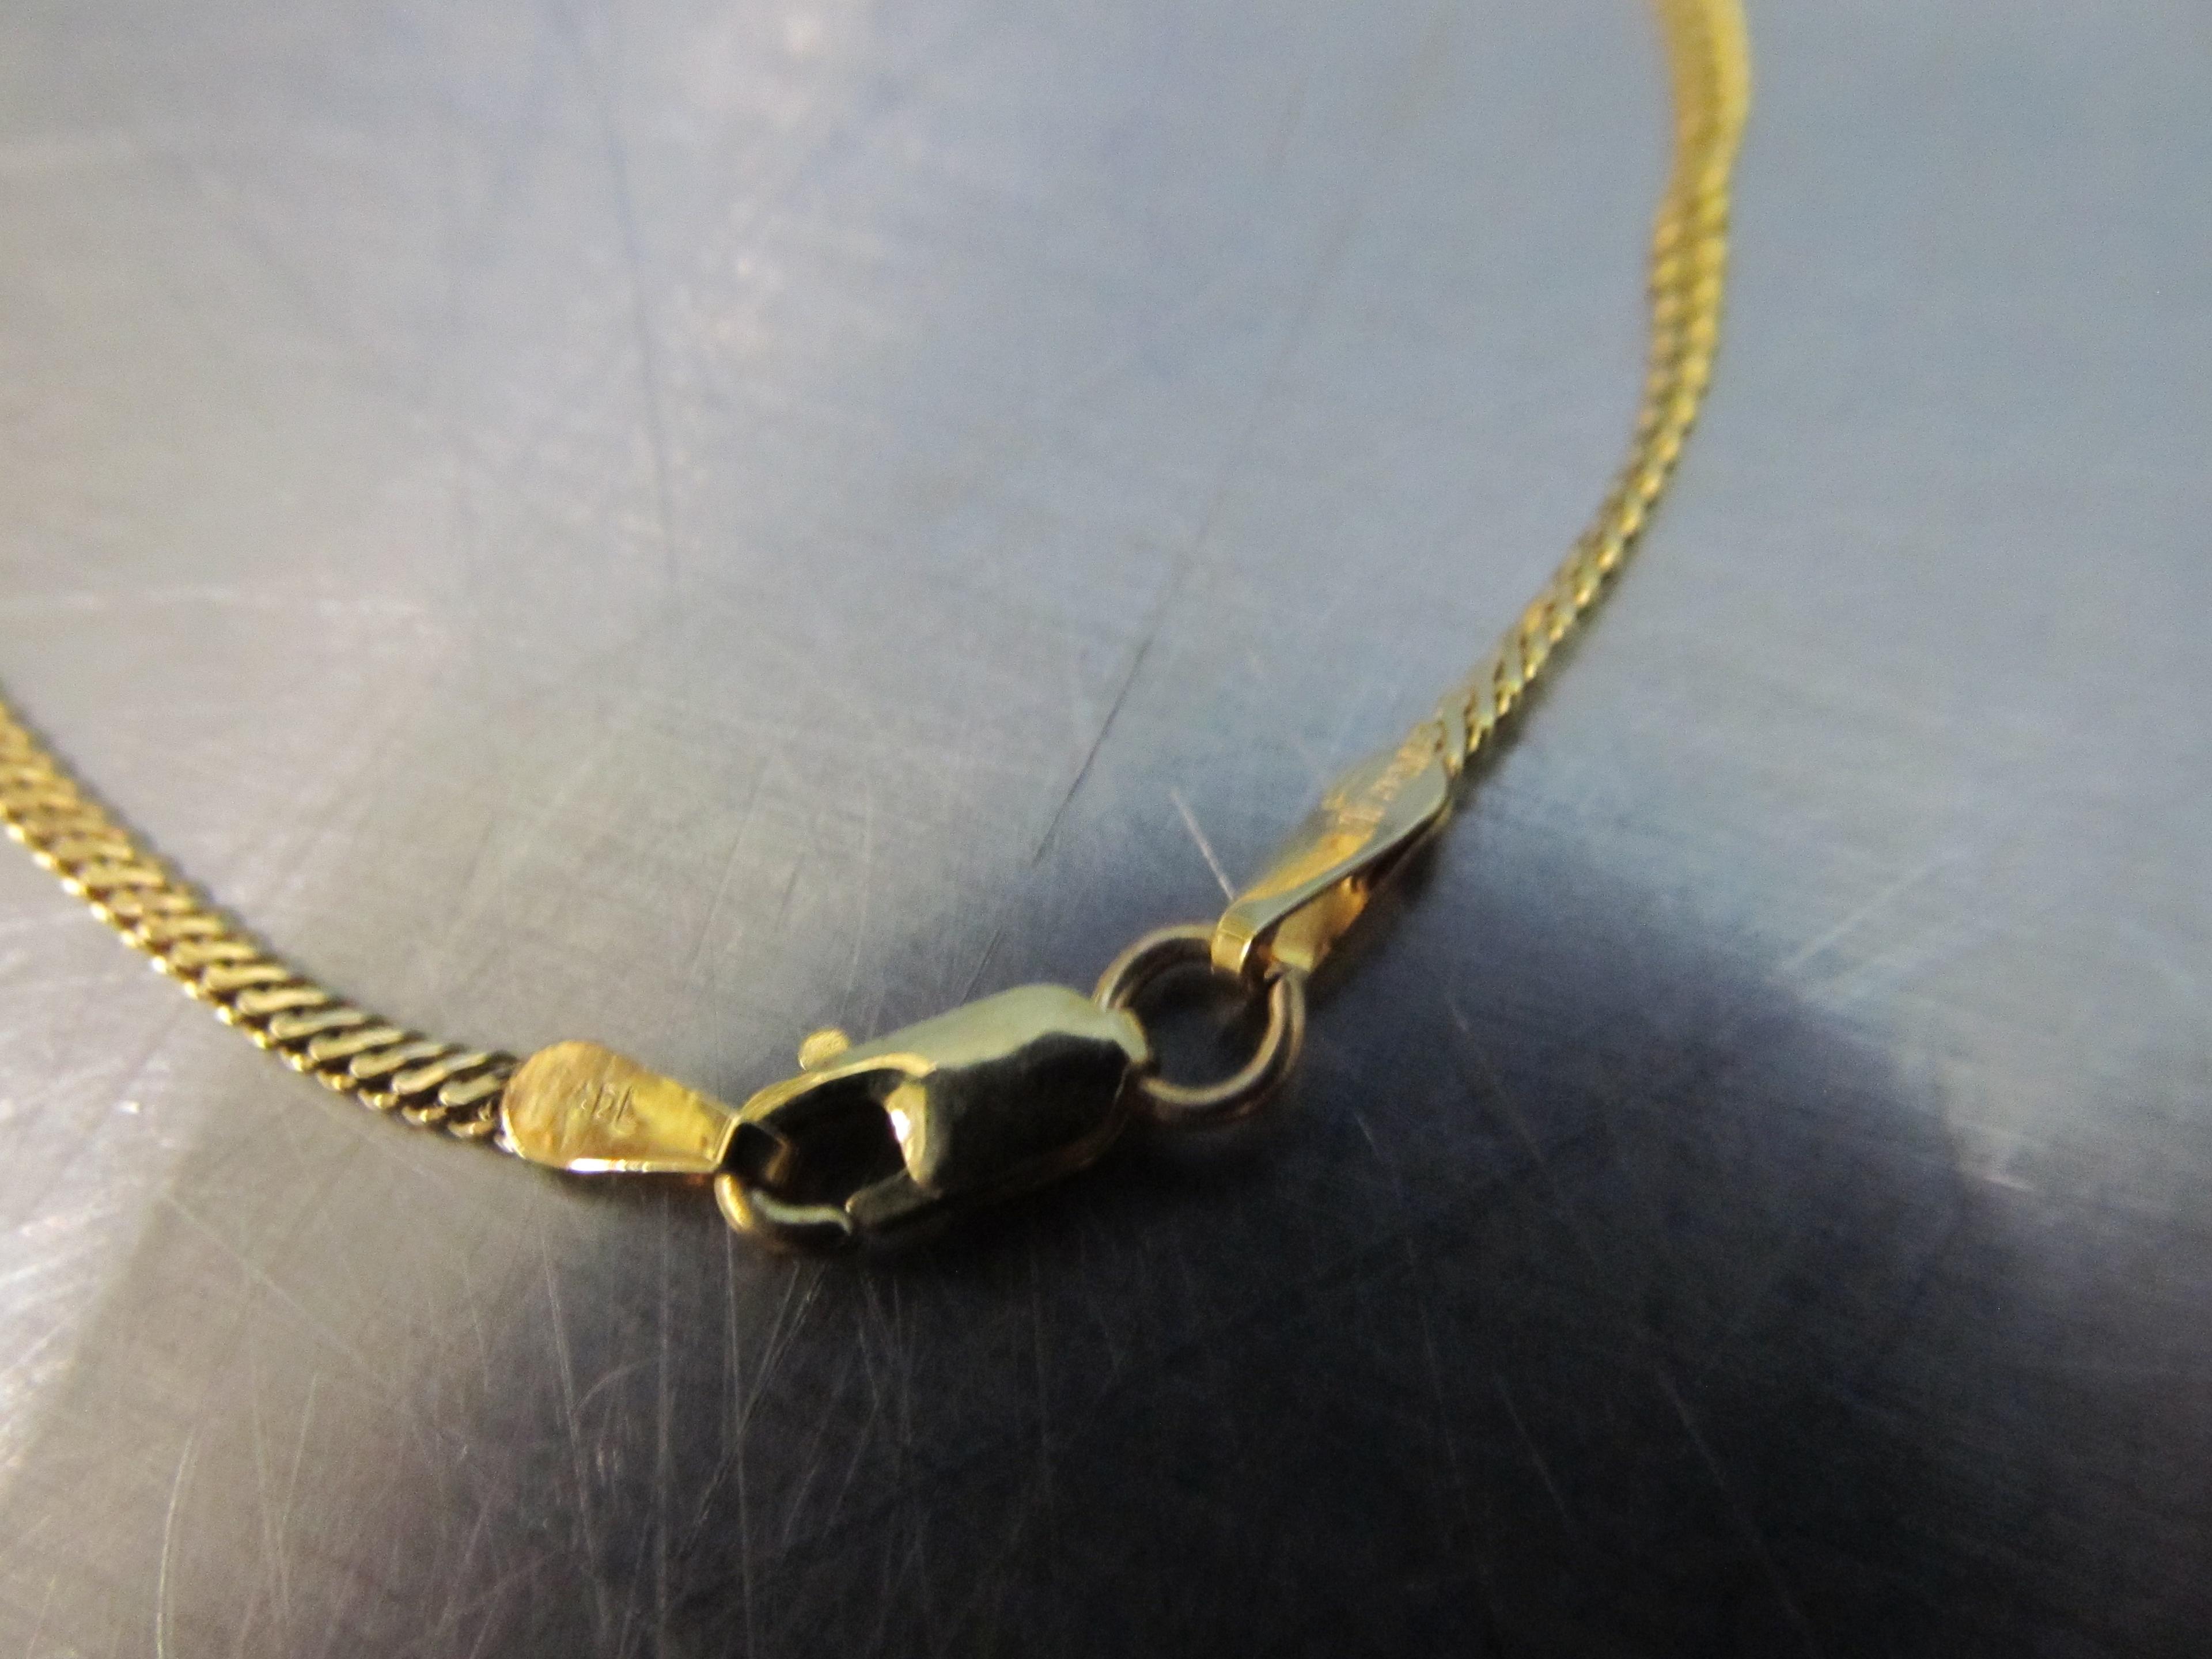 Lovely 10 KT Gold Necklace with Dark BLue Center Stone - 4.9 Grams - Made in Italy